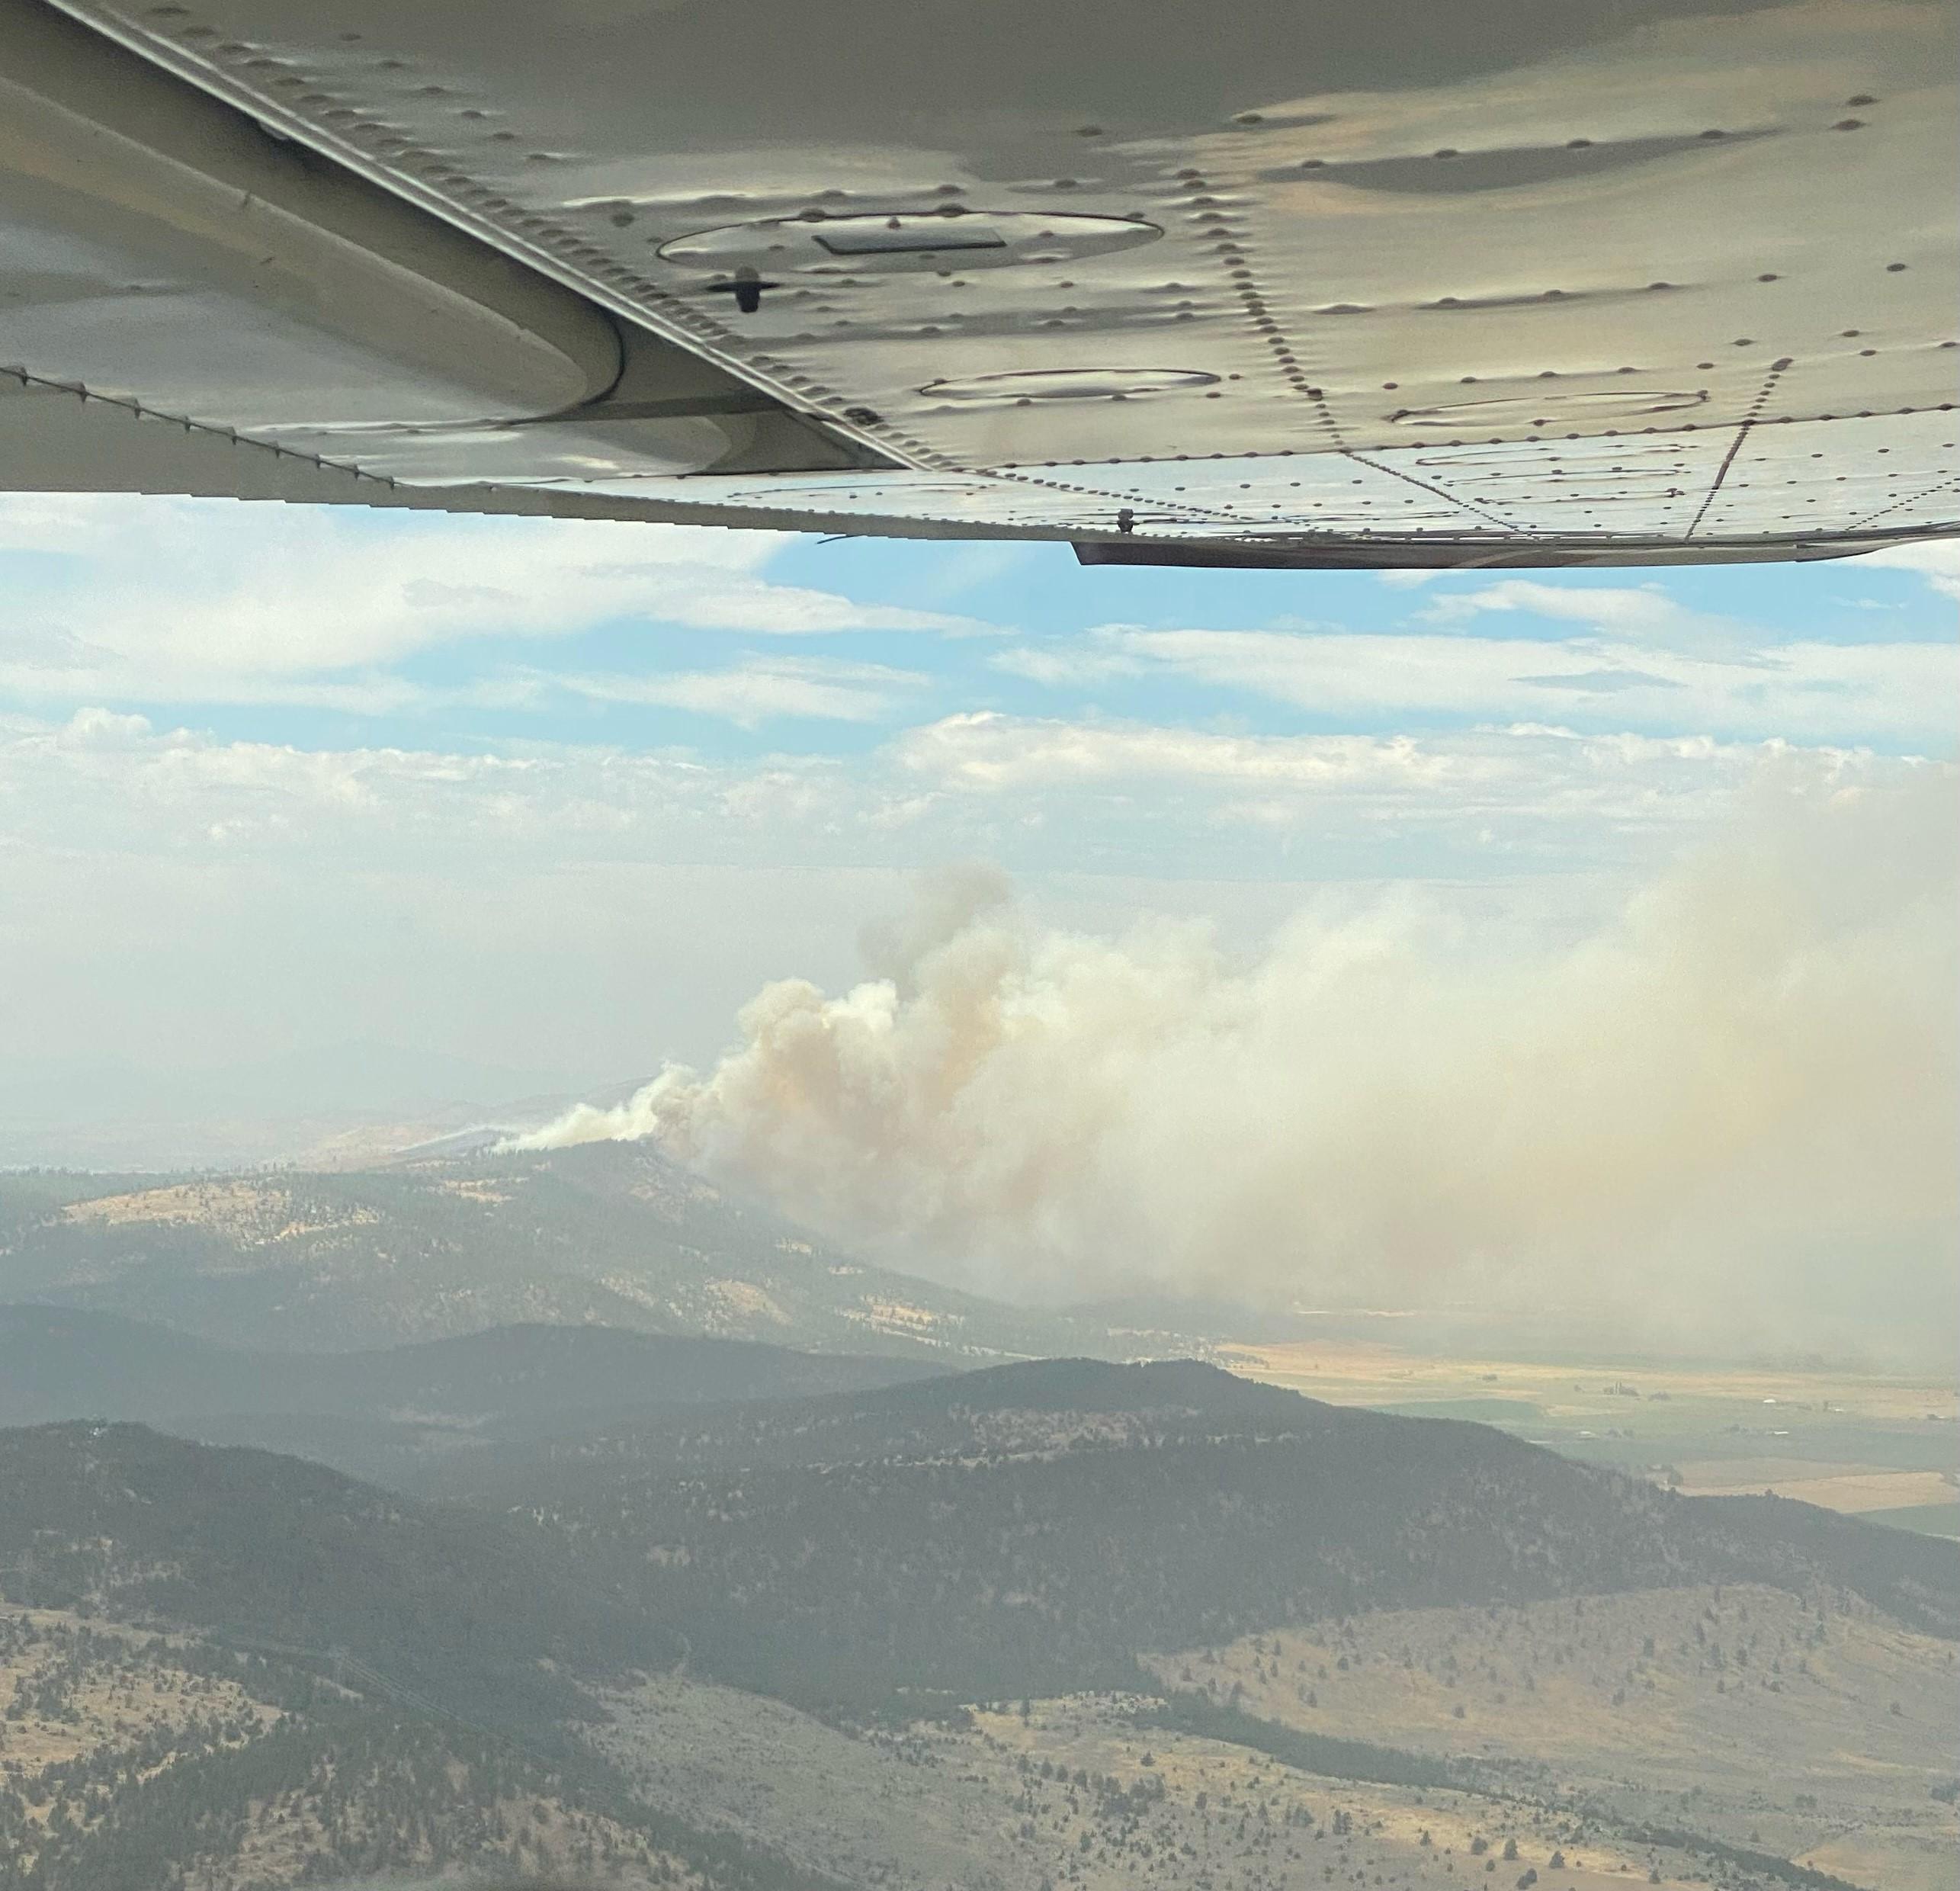 Picture taken from an aerial observer on Recon 6ZC on day one of the fire. This recon plane was not doing any initial attack duties. They were on a recon mission to look for smokes due to the lightning in the area.